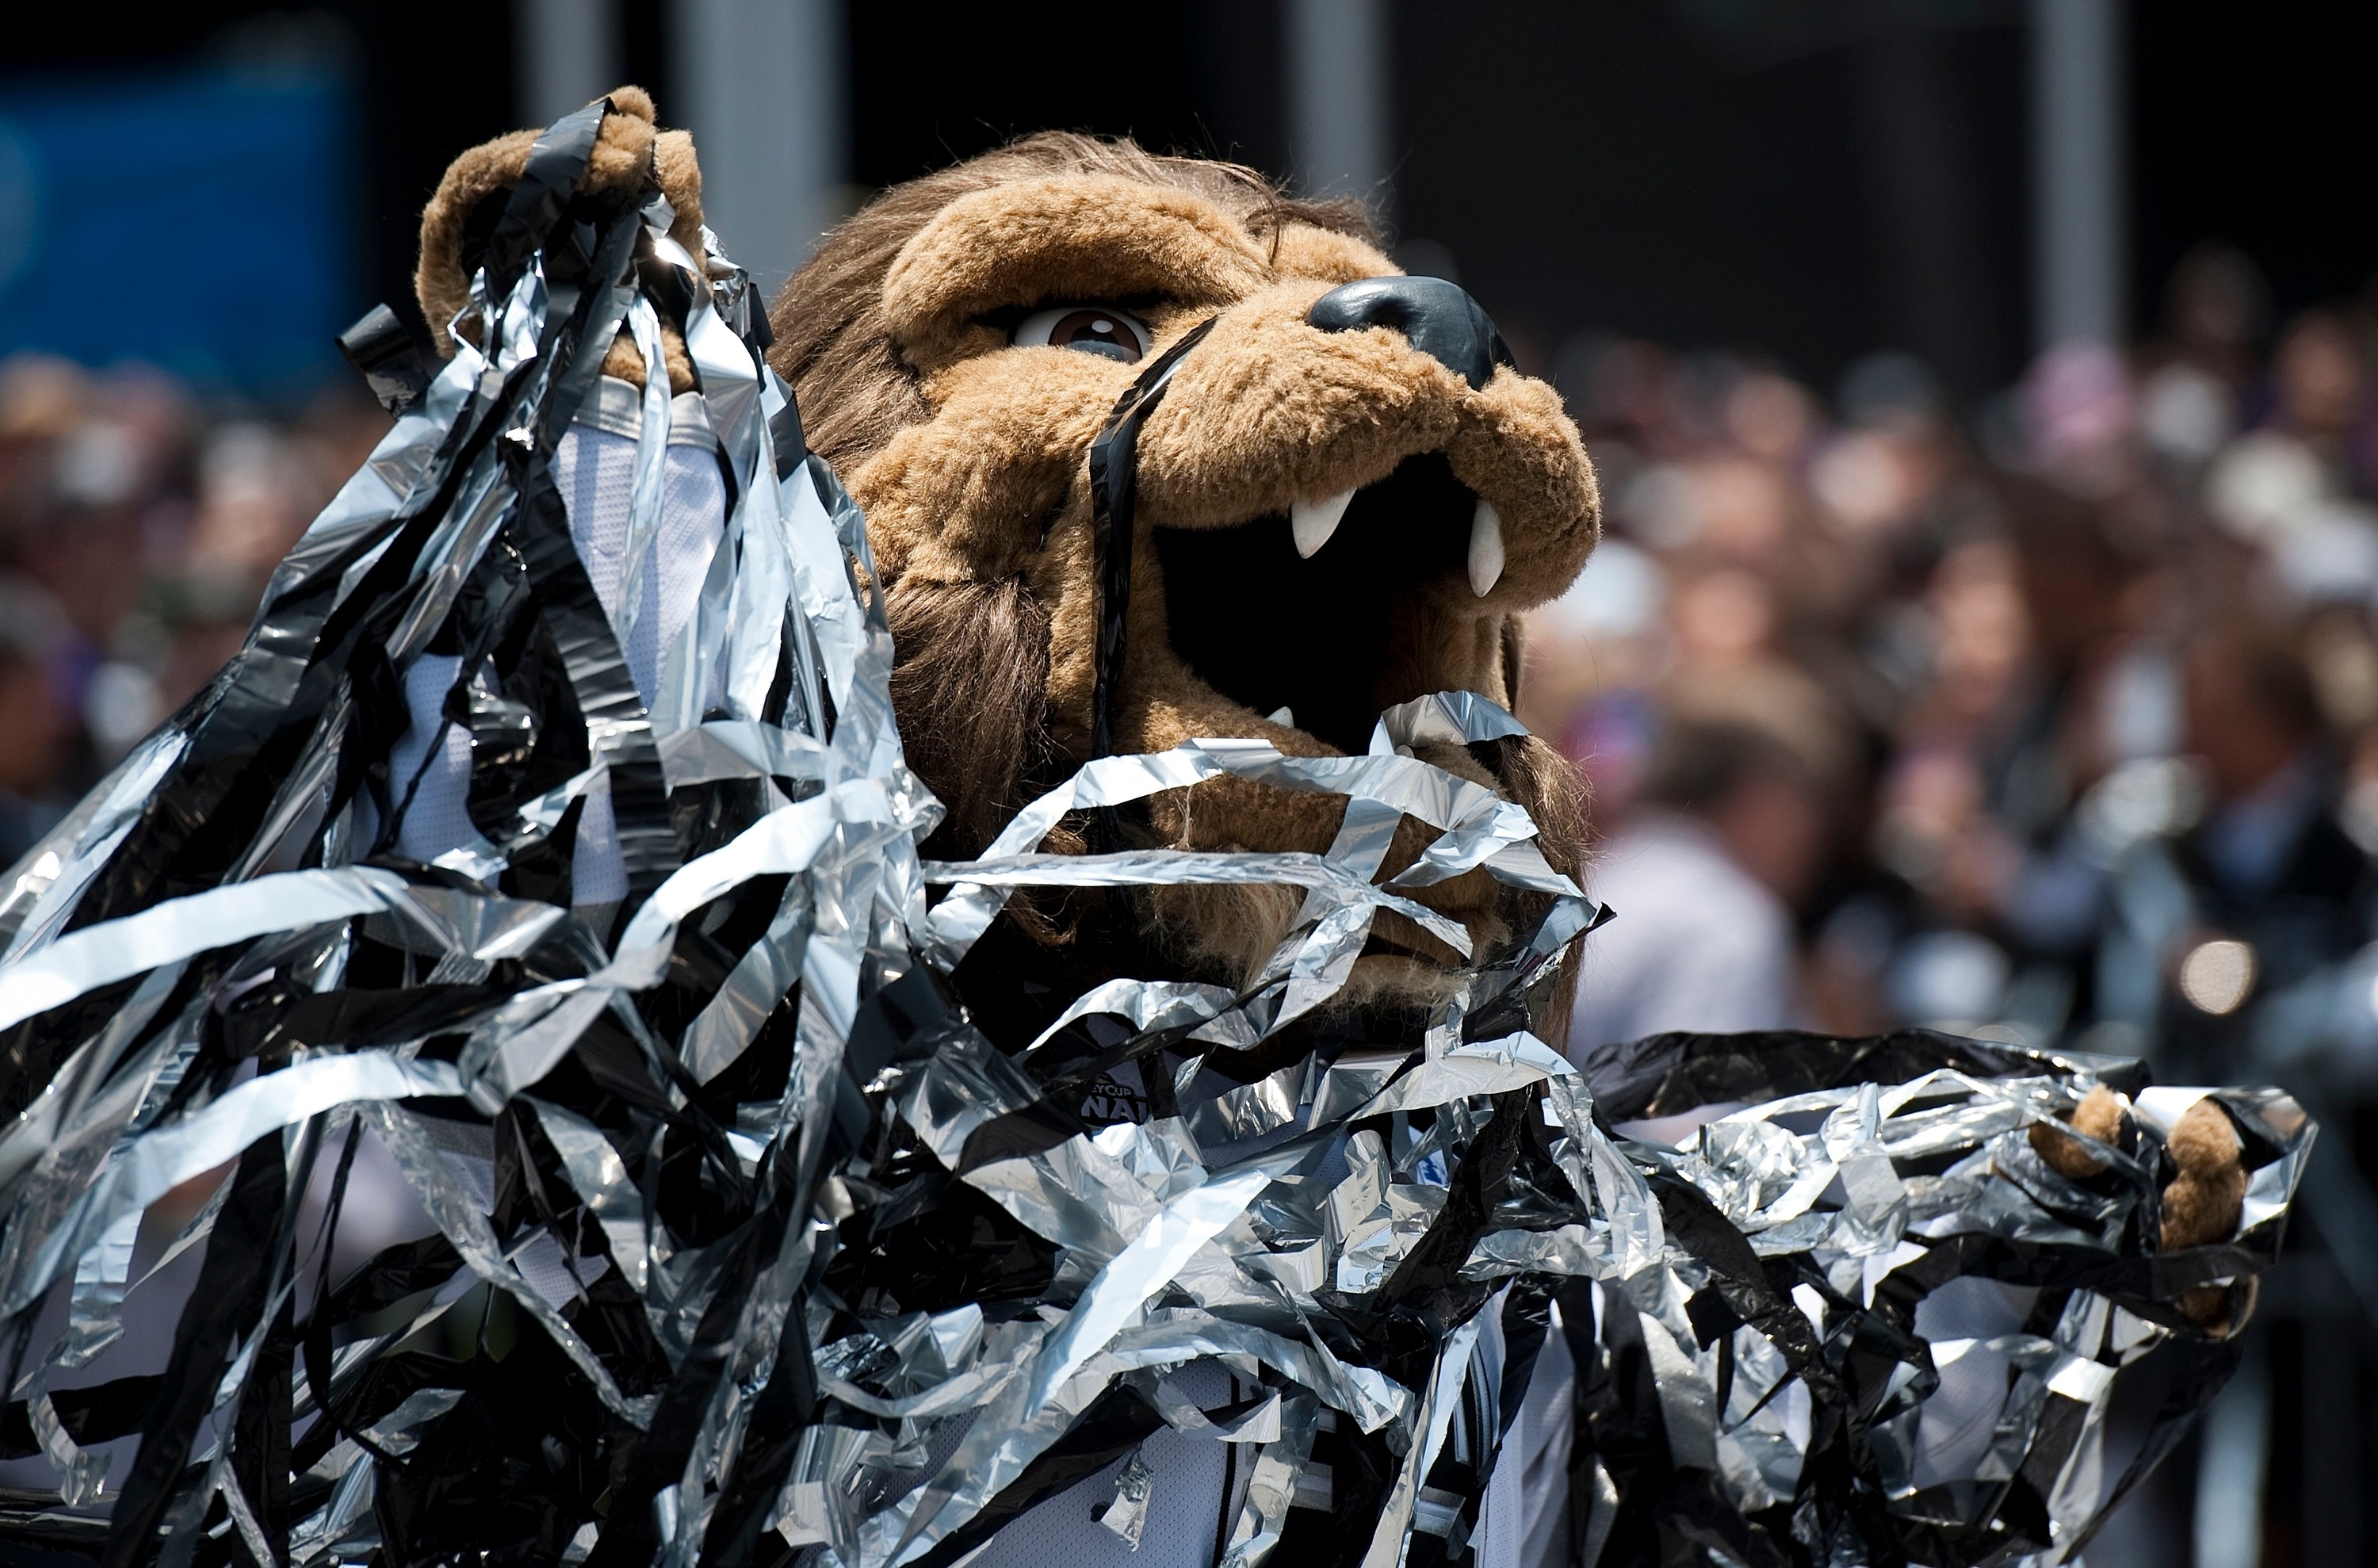 Lawsuit alleges inappropriate behavior by L.A. Kings' mascot